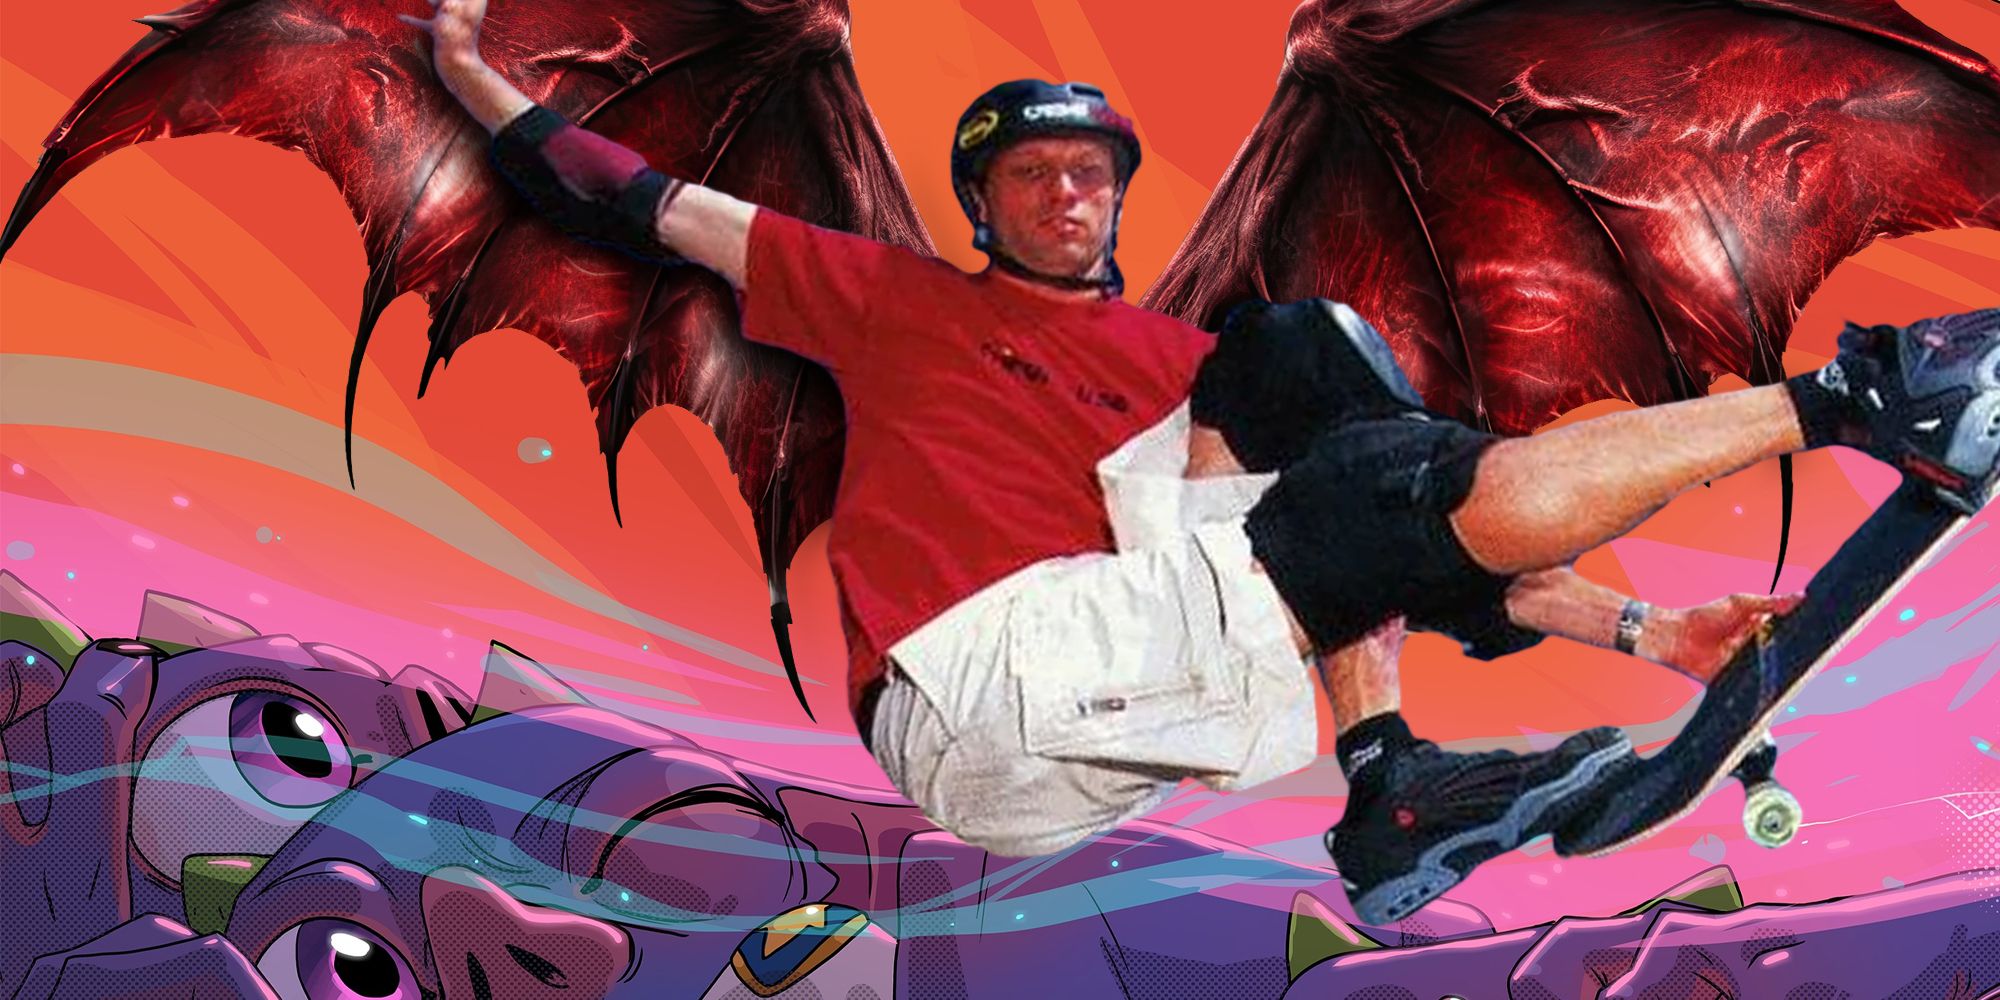 Tony Hawks Pro Skater 3 art with demon wings and Helskate in the background